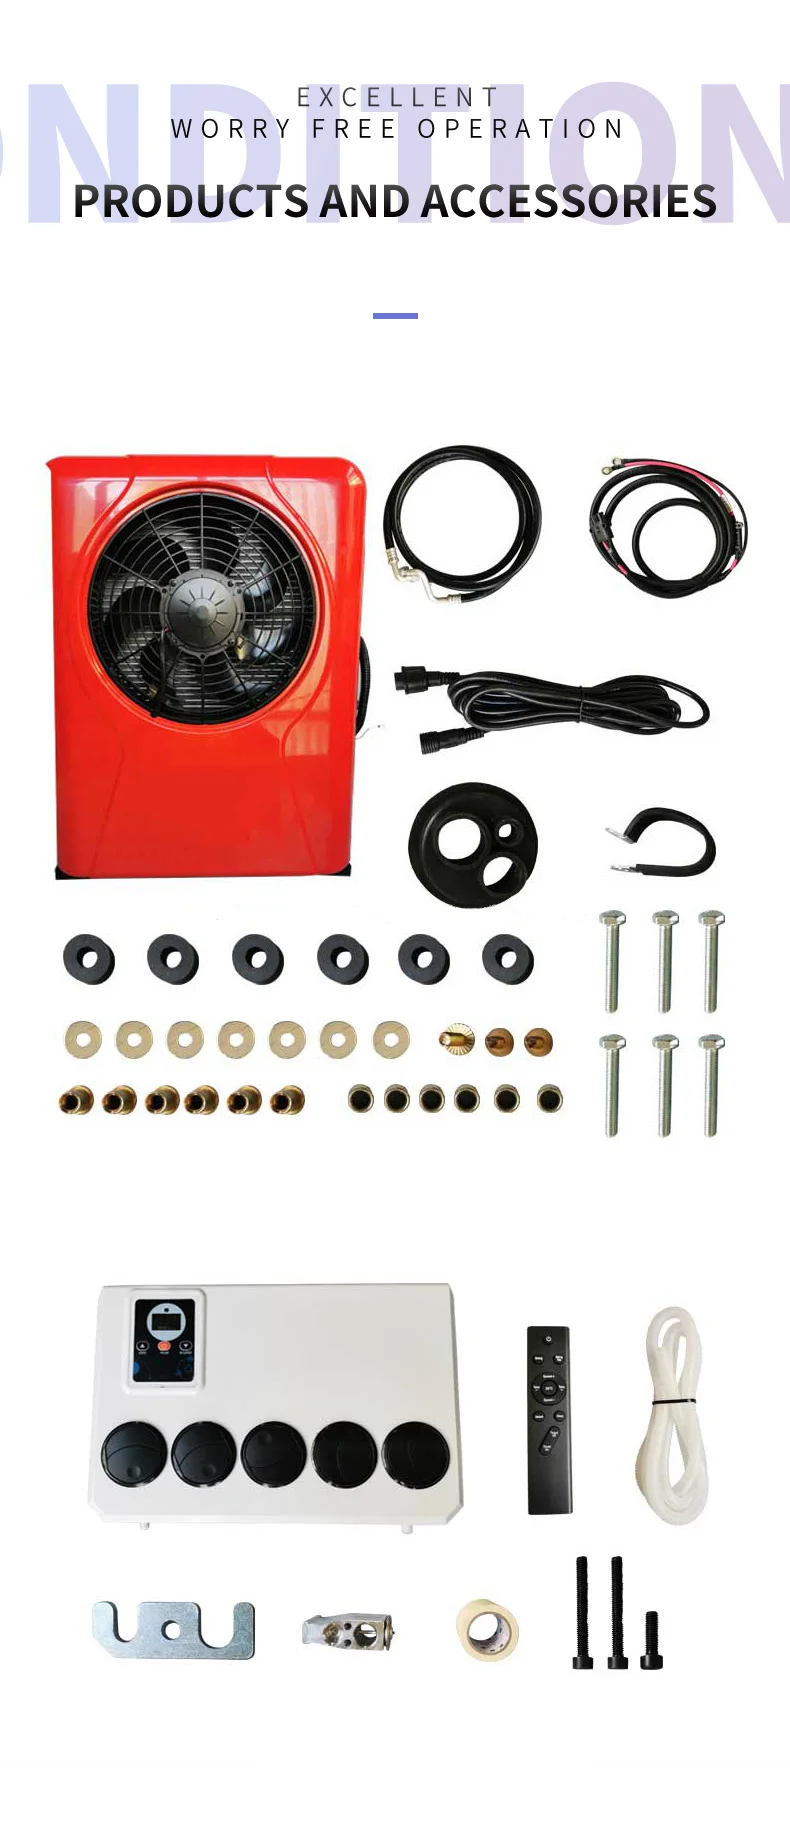 

12V 24V Electric DC Split Parking Air Conditioner For Truck Tractor Cab Universal